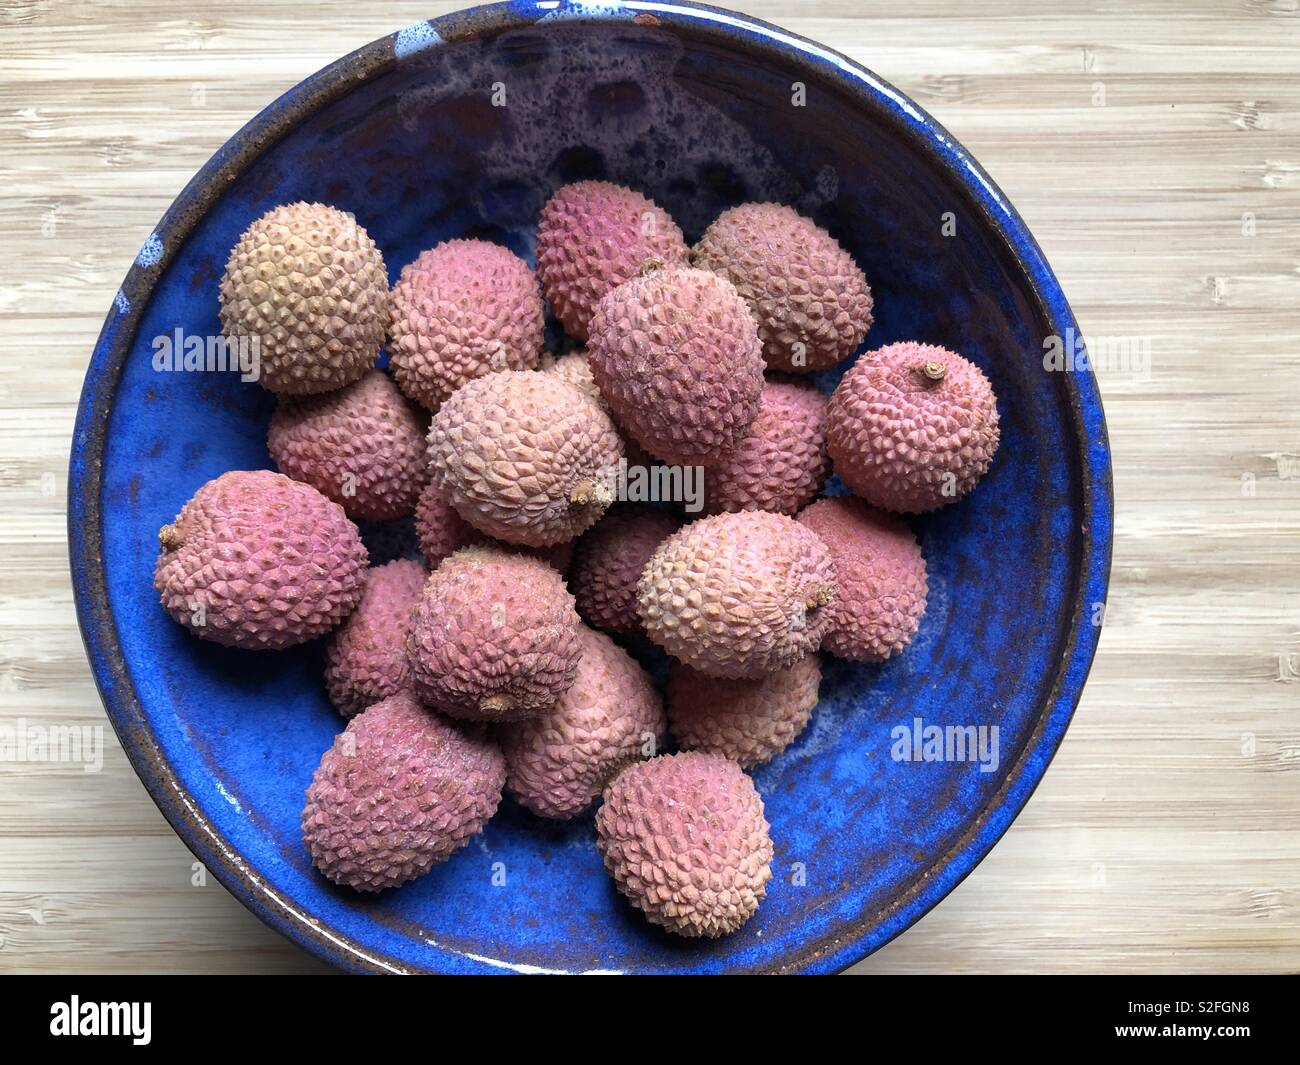 Lychees in a blue ceramic bowl Stock Photo